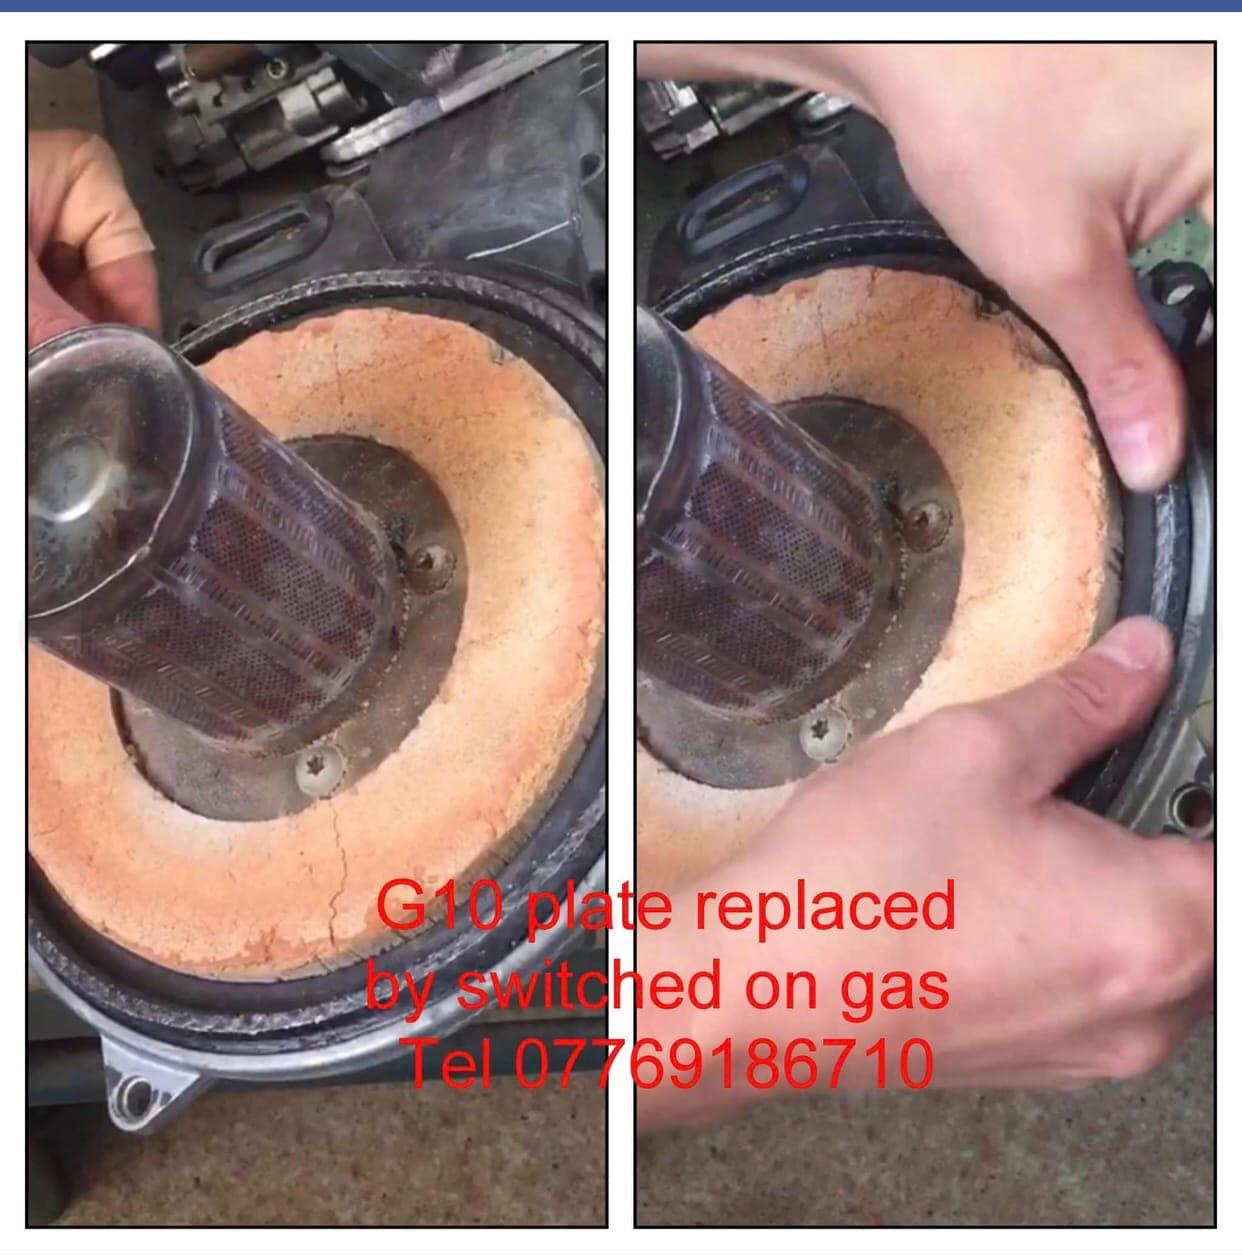 Images Switched on Gas